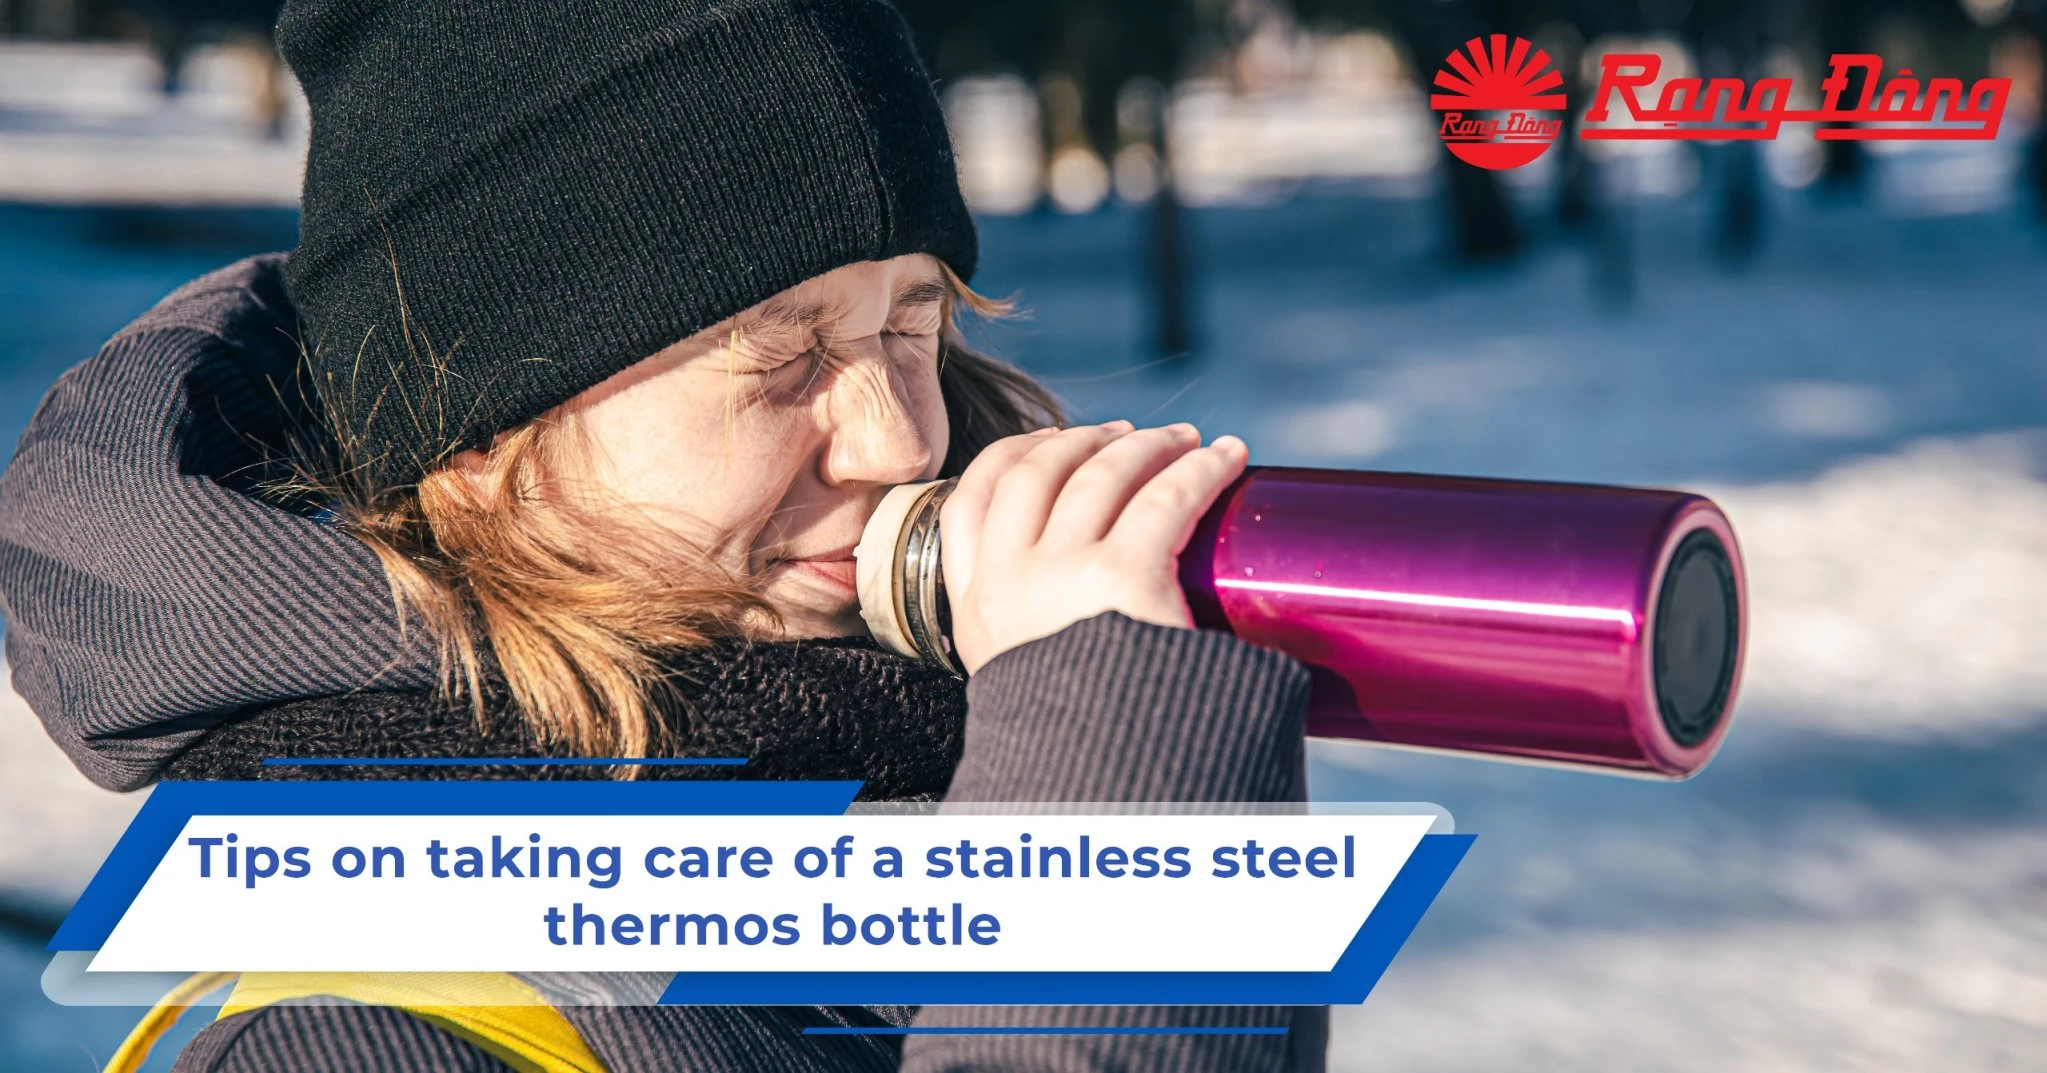 Tips on taking care of a stainless steel thermos bottle